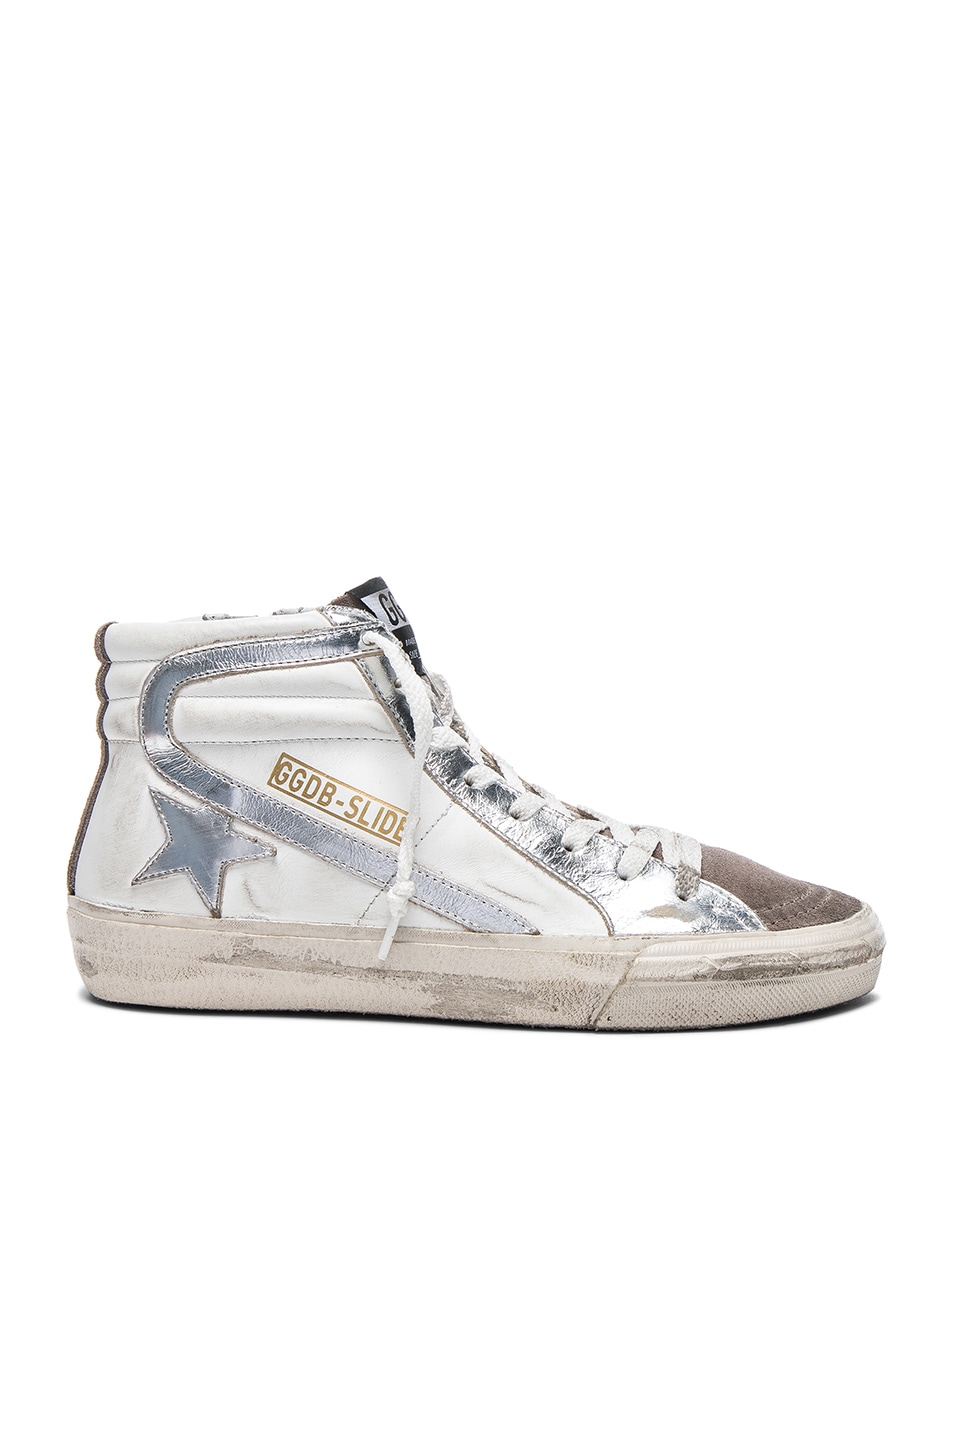 Golden Goose Leather Slide Sneakers in Silver & White | FWRD